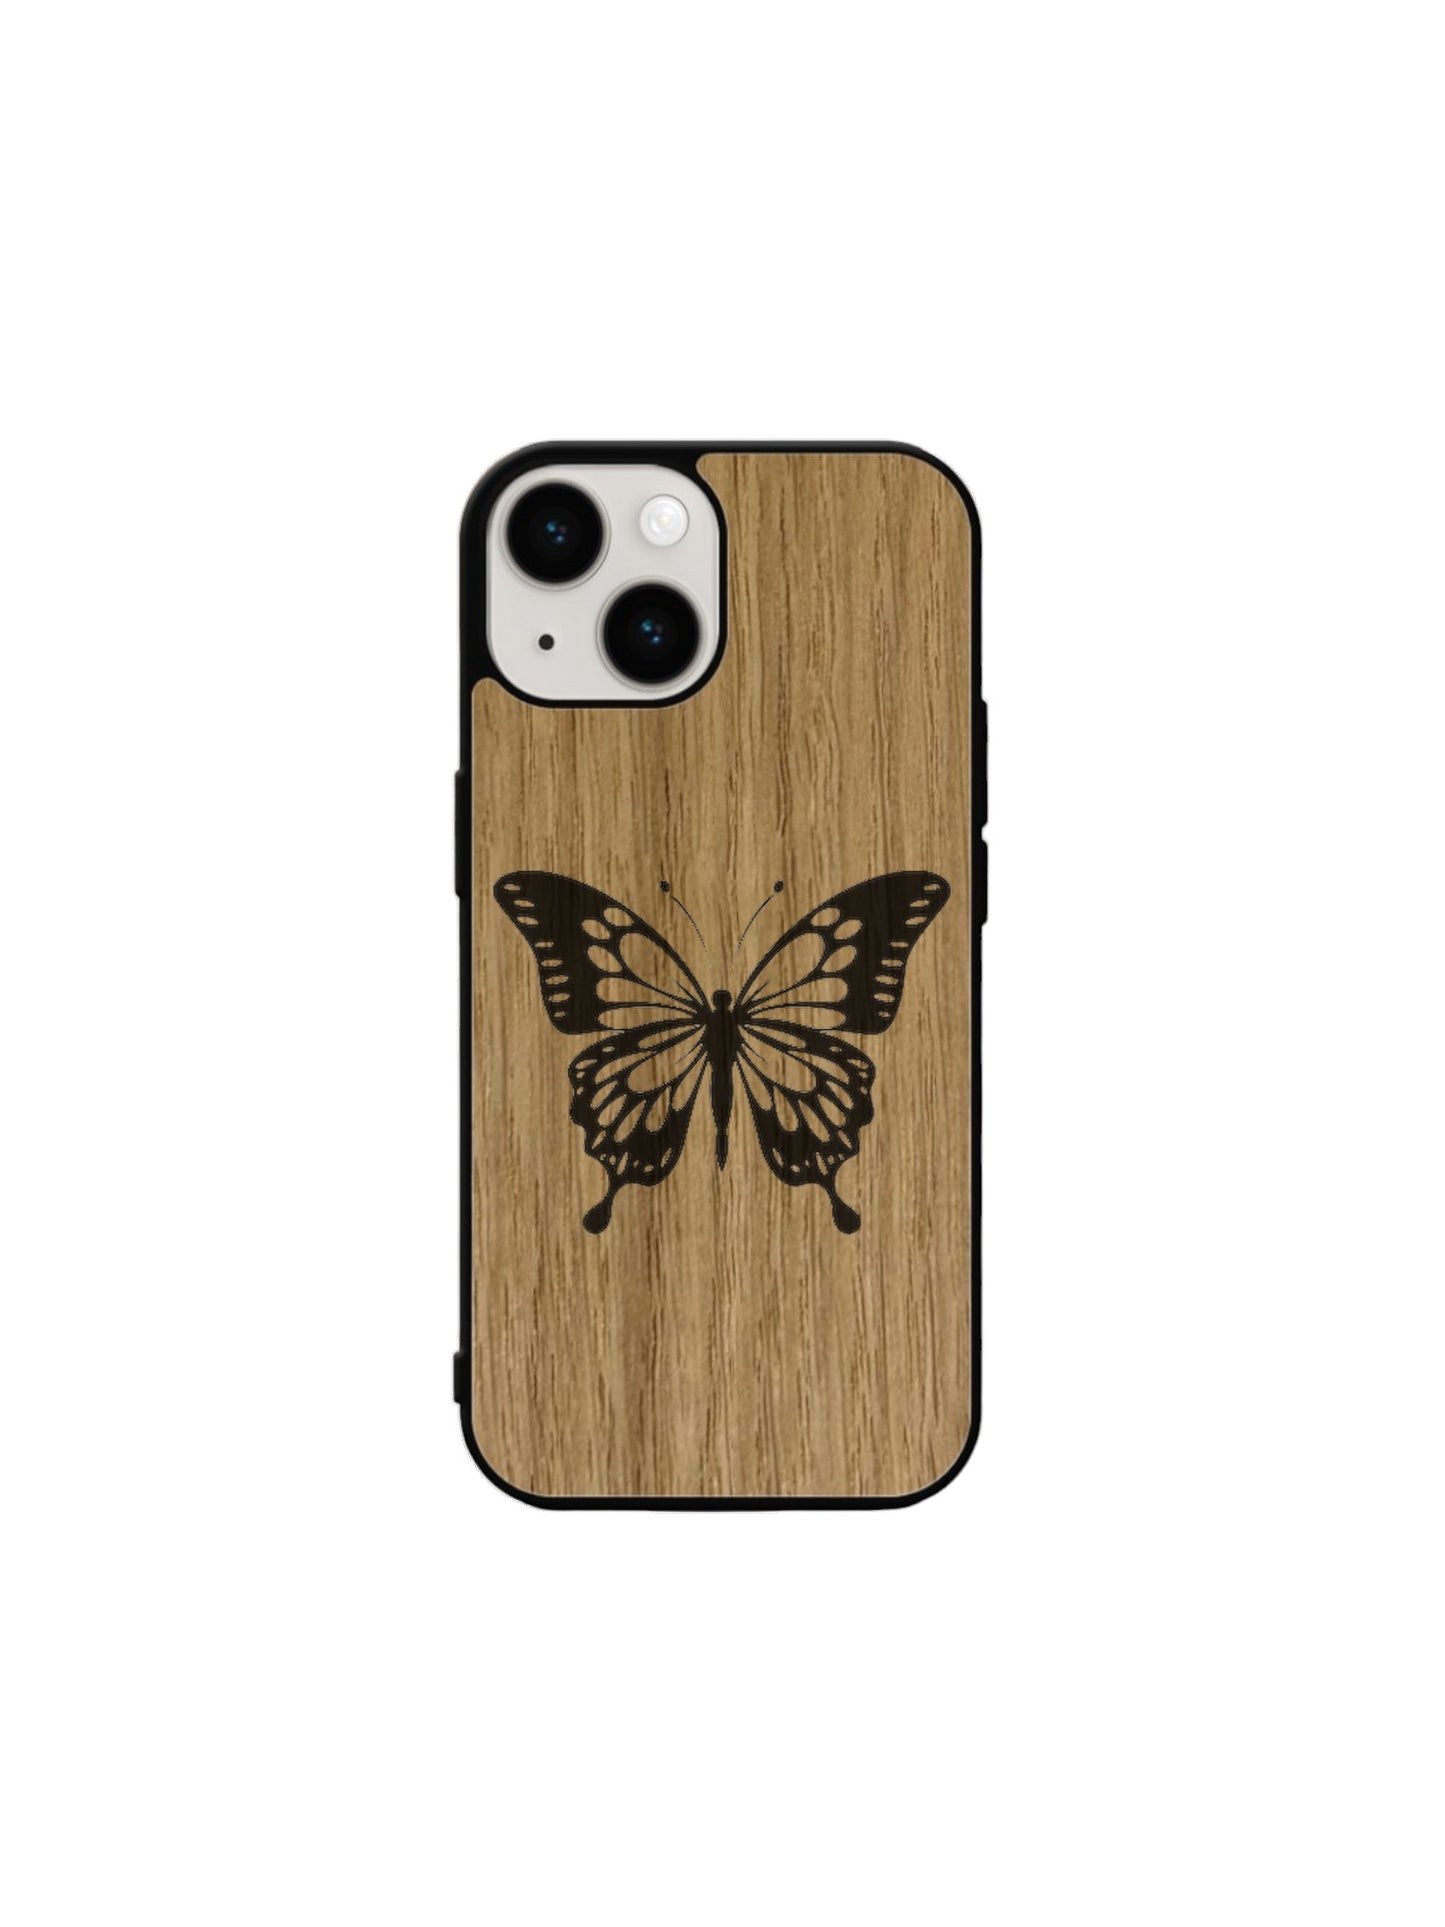 Iphone case - Butterfly